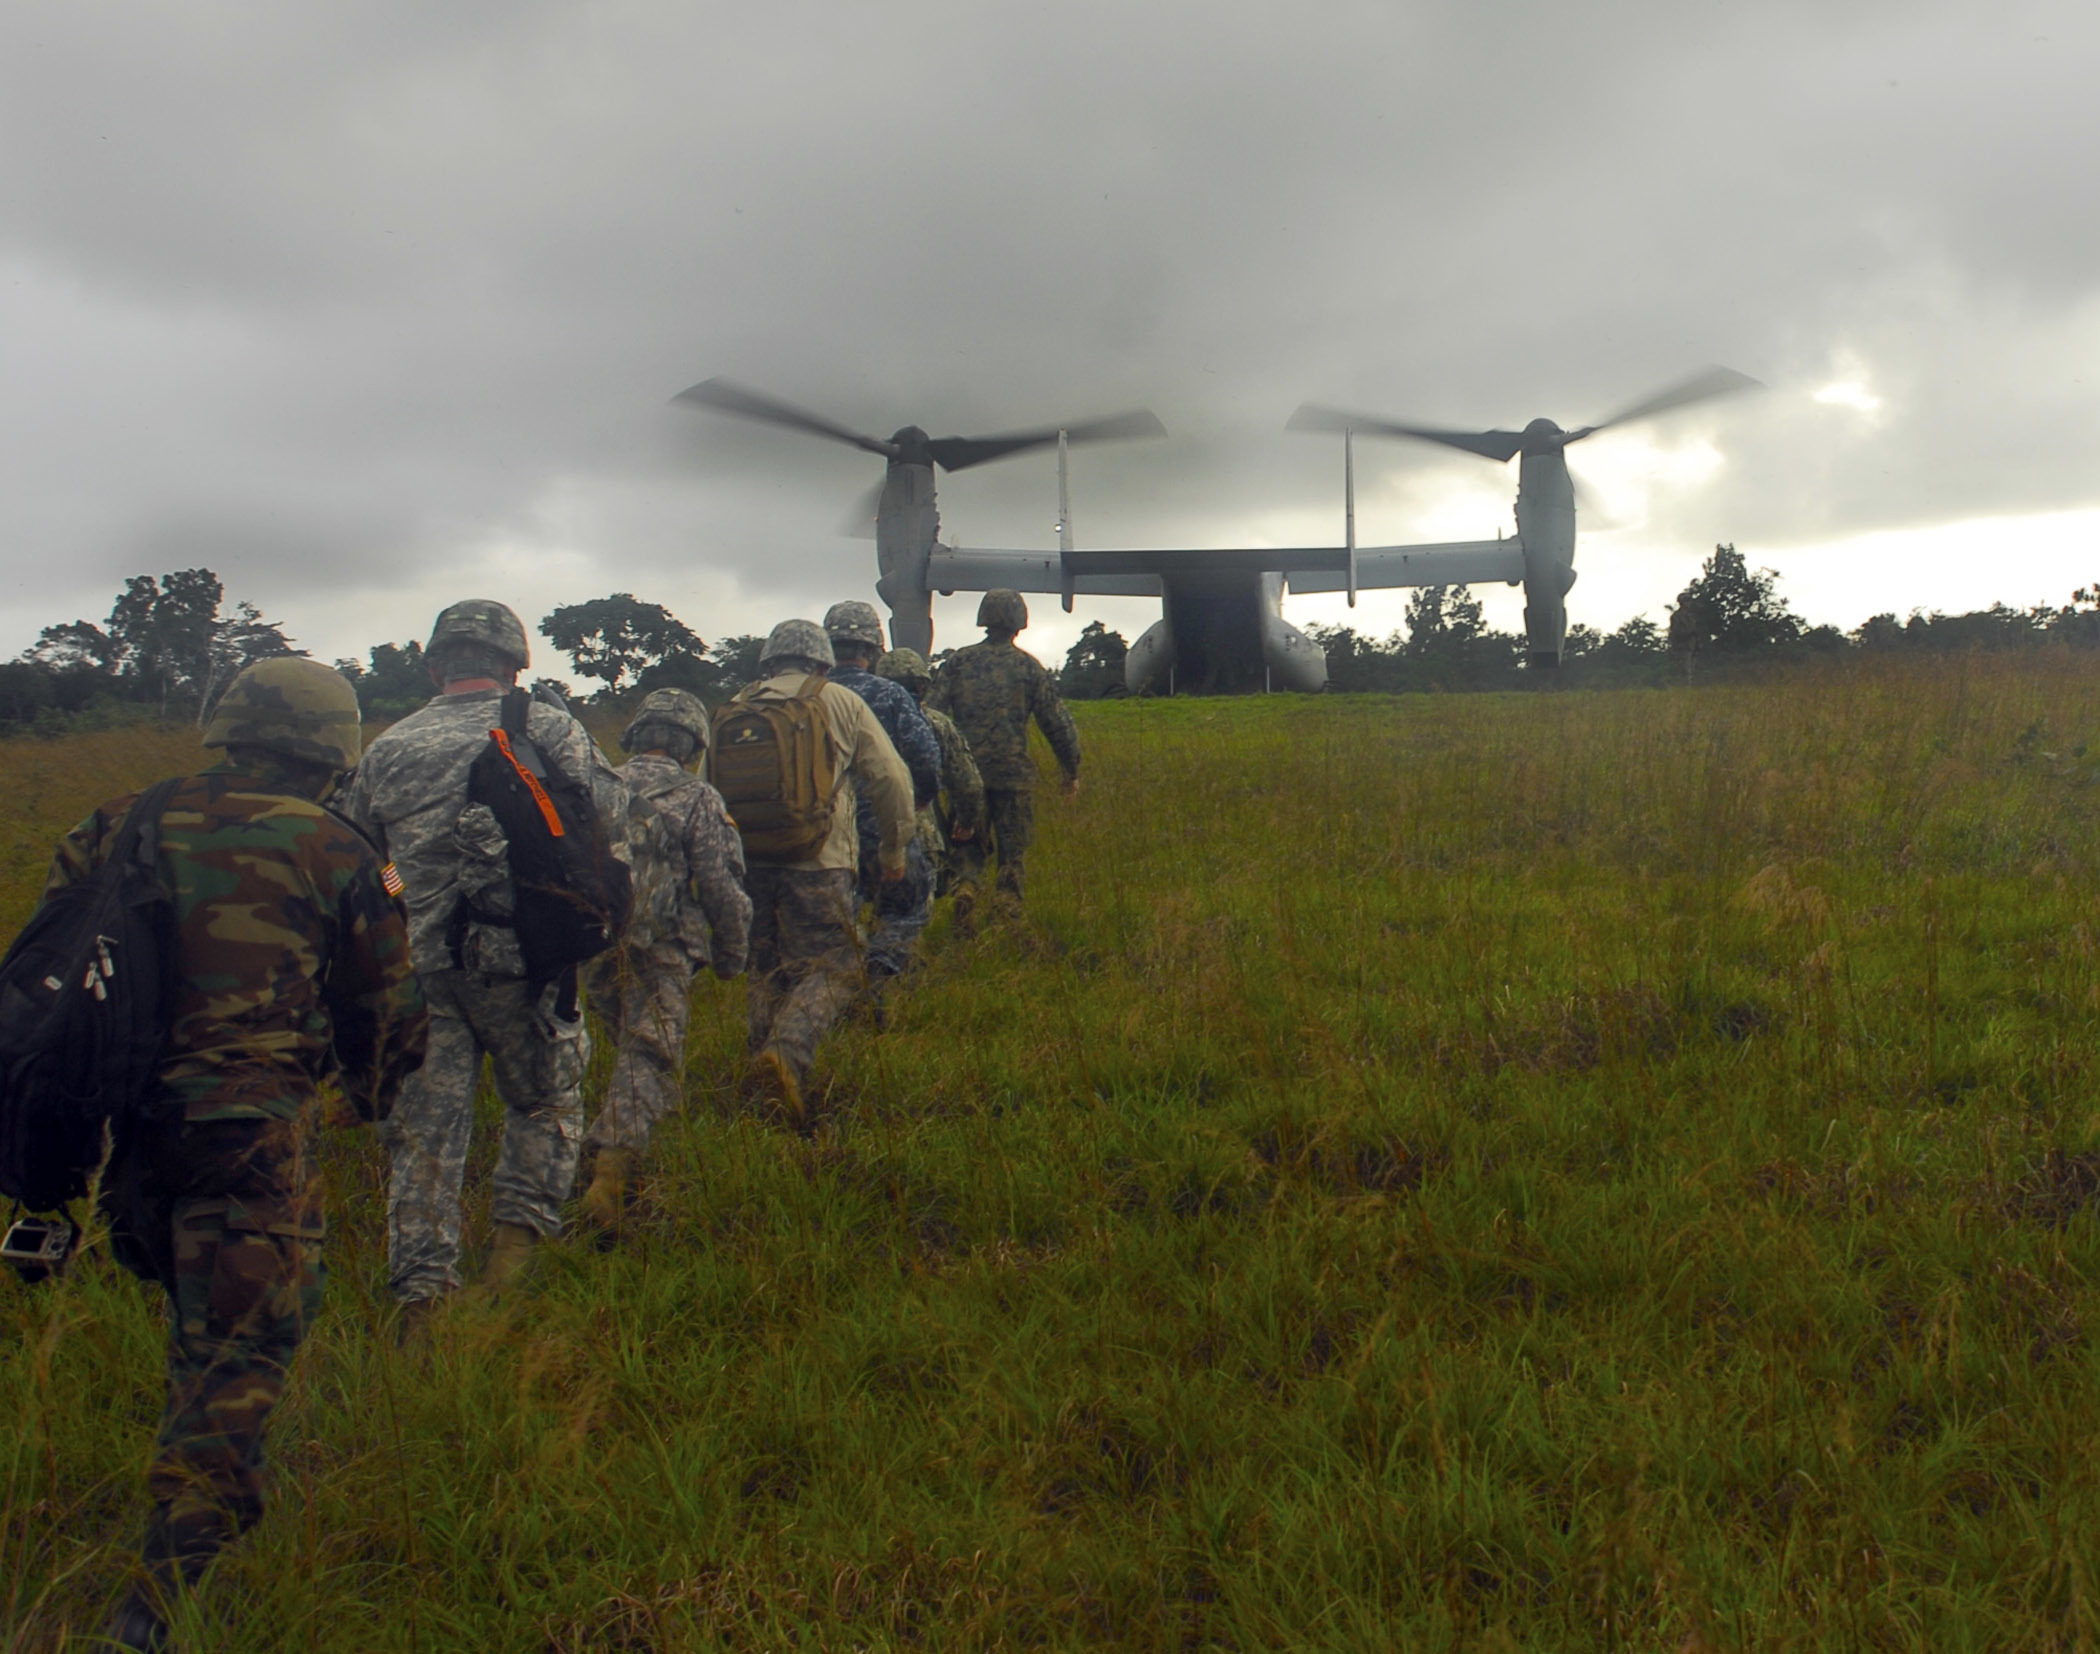 U.S. Army and Marine Corps personnel prepare to board a U.S. Marine Corps MV-22 aircraft in October 2014 after surveying the site of a future Ebola treatment unit near Barclayville, Liberia. The U.S. military forces in West Africa during the Ebola outbreak worked well with the civilian machinery running the response, Aylward says, adding that U.S. aircraft “came in real handy getting out to some of these remote areas.” (U.S. Army Africa photo by Pfc. Craig Philbrick)